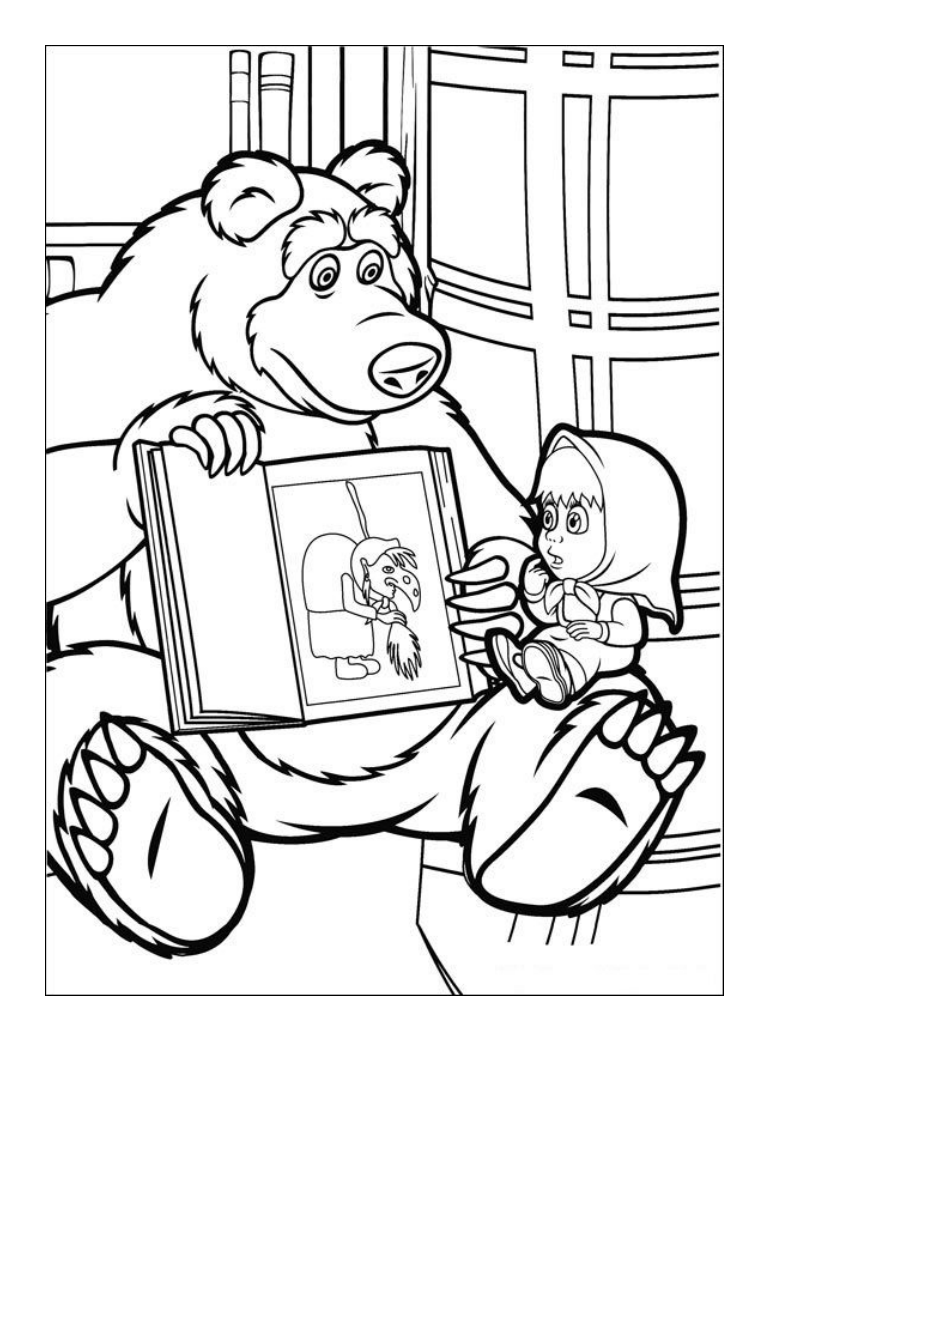 Masha and the Bear Coloring Page - Coloring images featuring beloved characters from "Masha and the Bear" animated series.